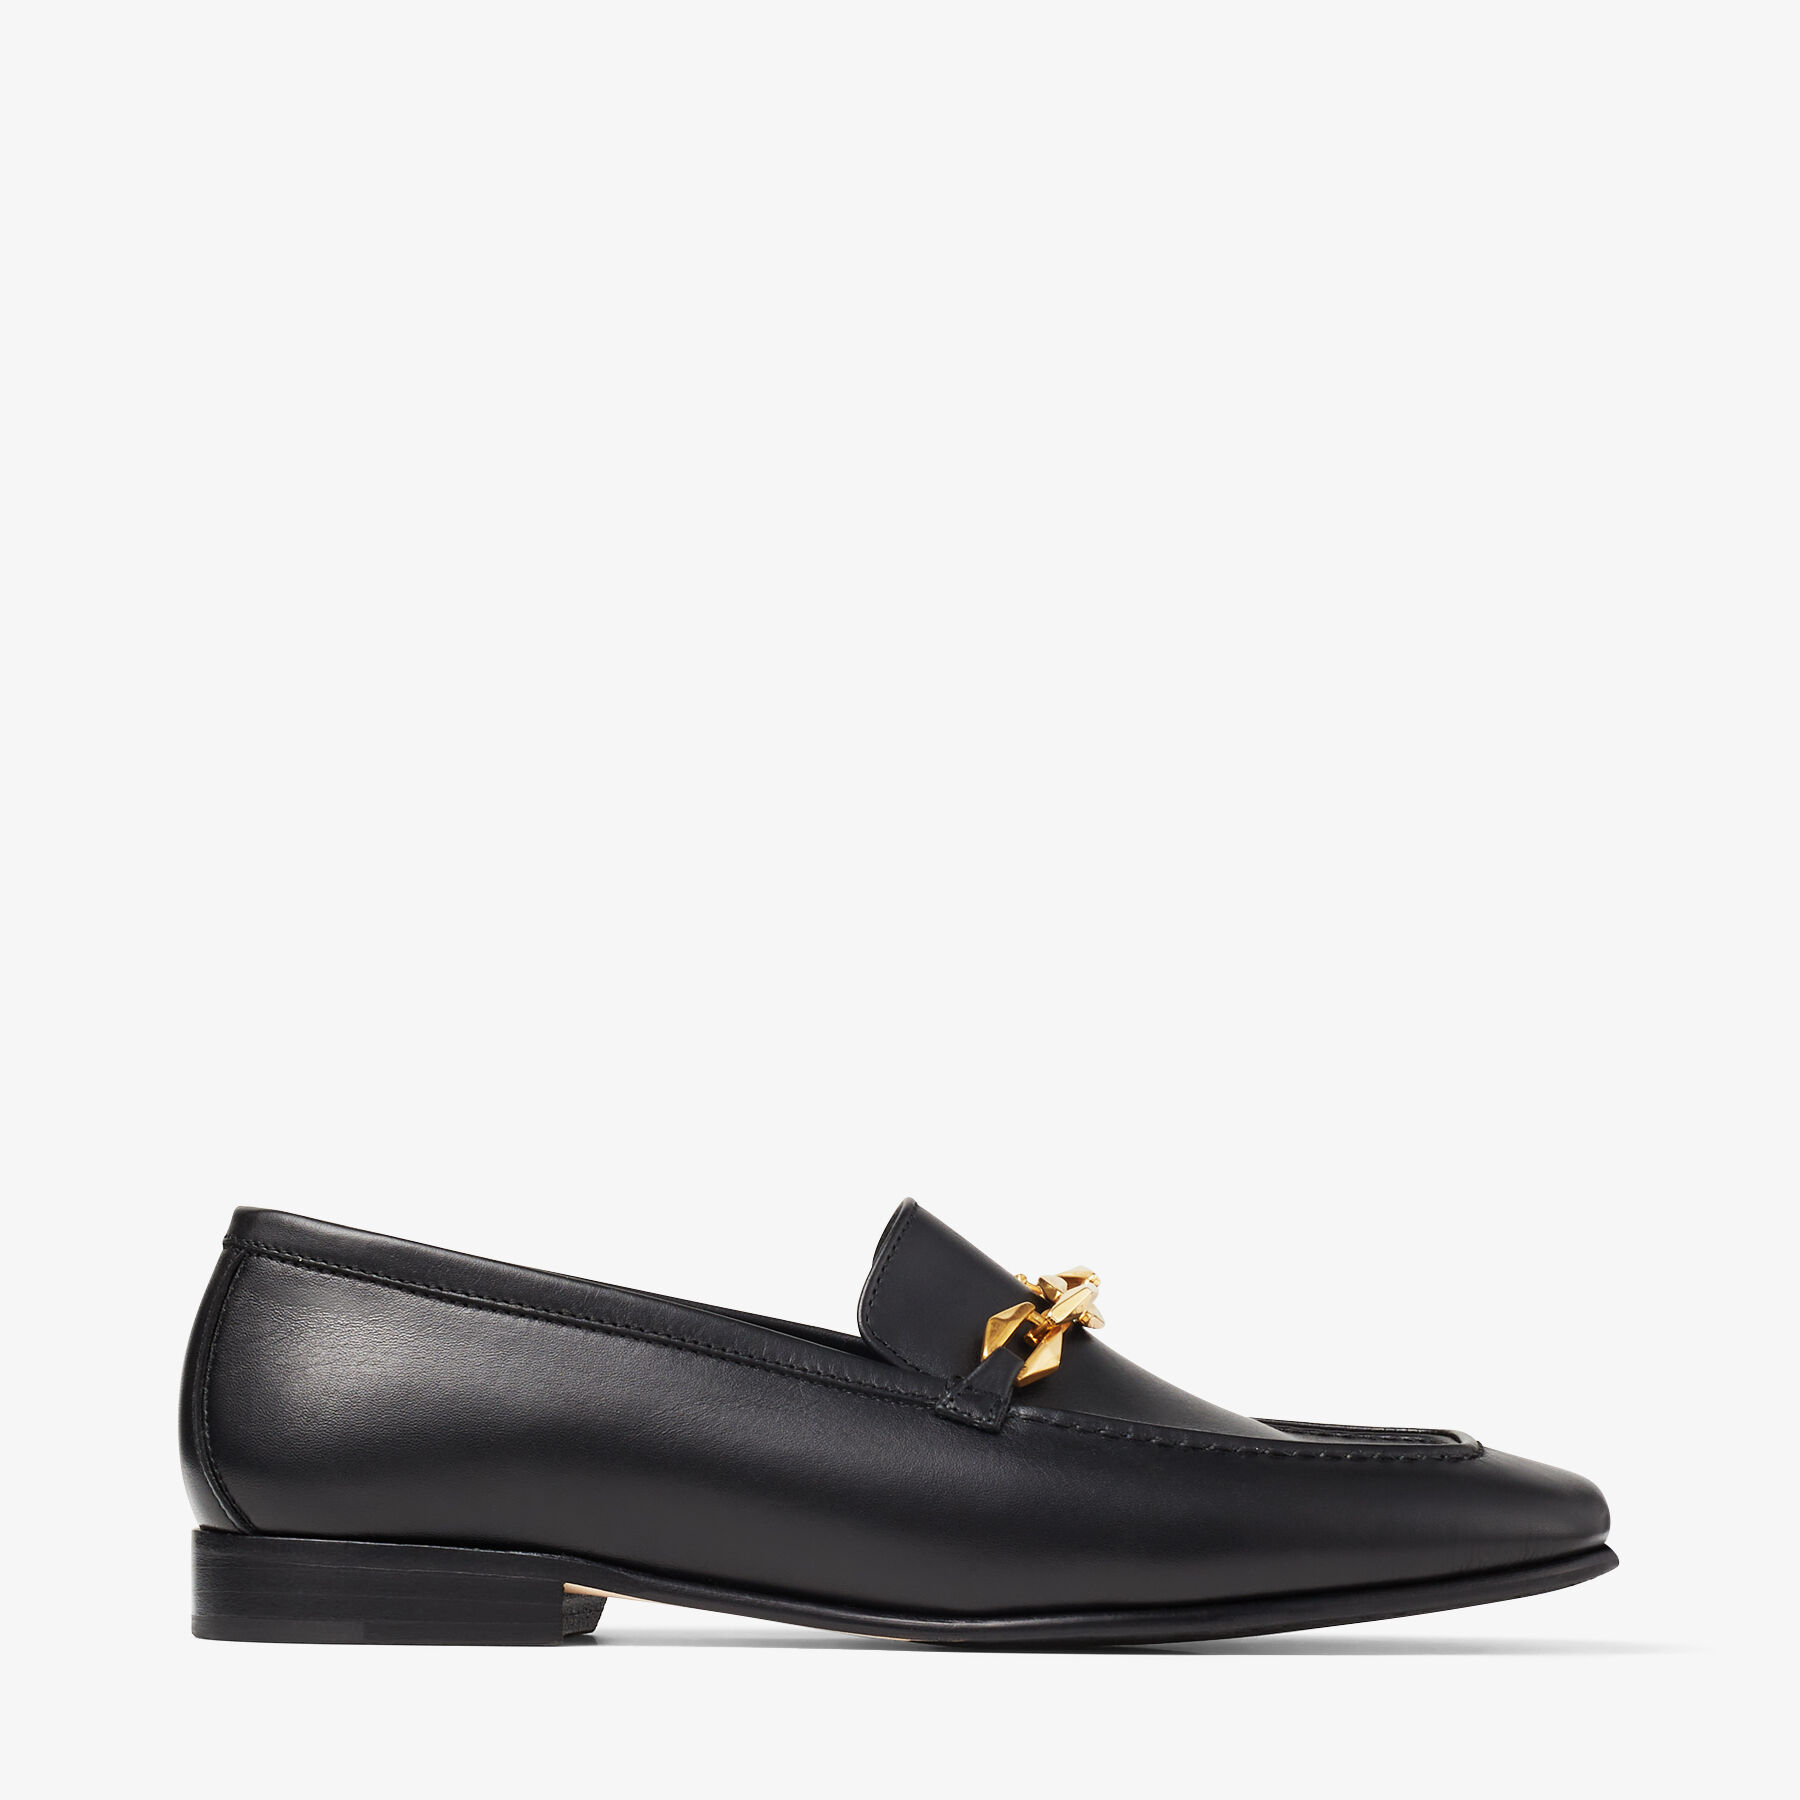 DIAMOND TILDA LOAFER | Black Calf Leather Loafers with Chain Embellishment  | Spring 2023 collection | JIMMY CHOO